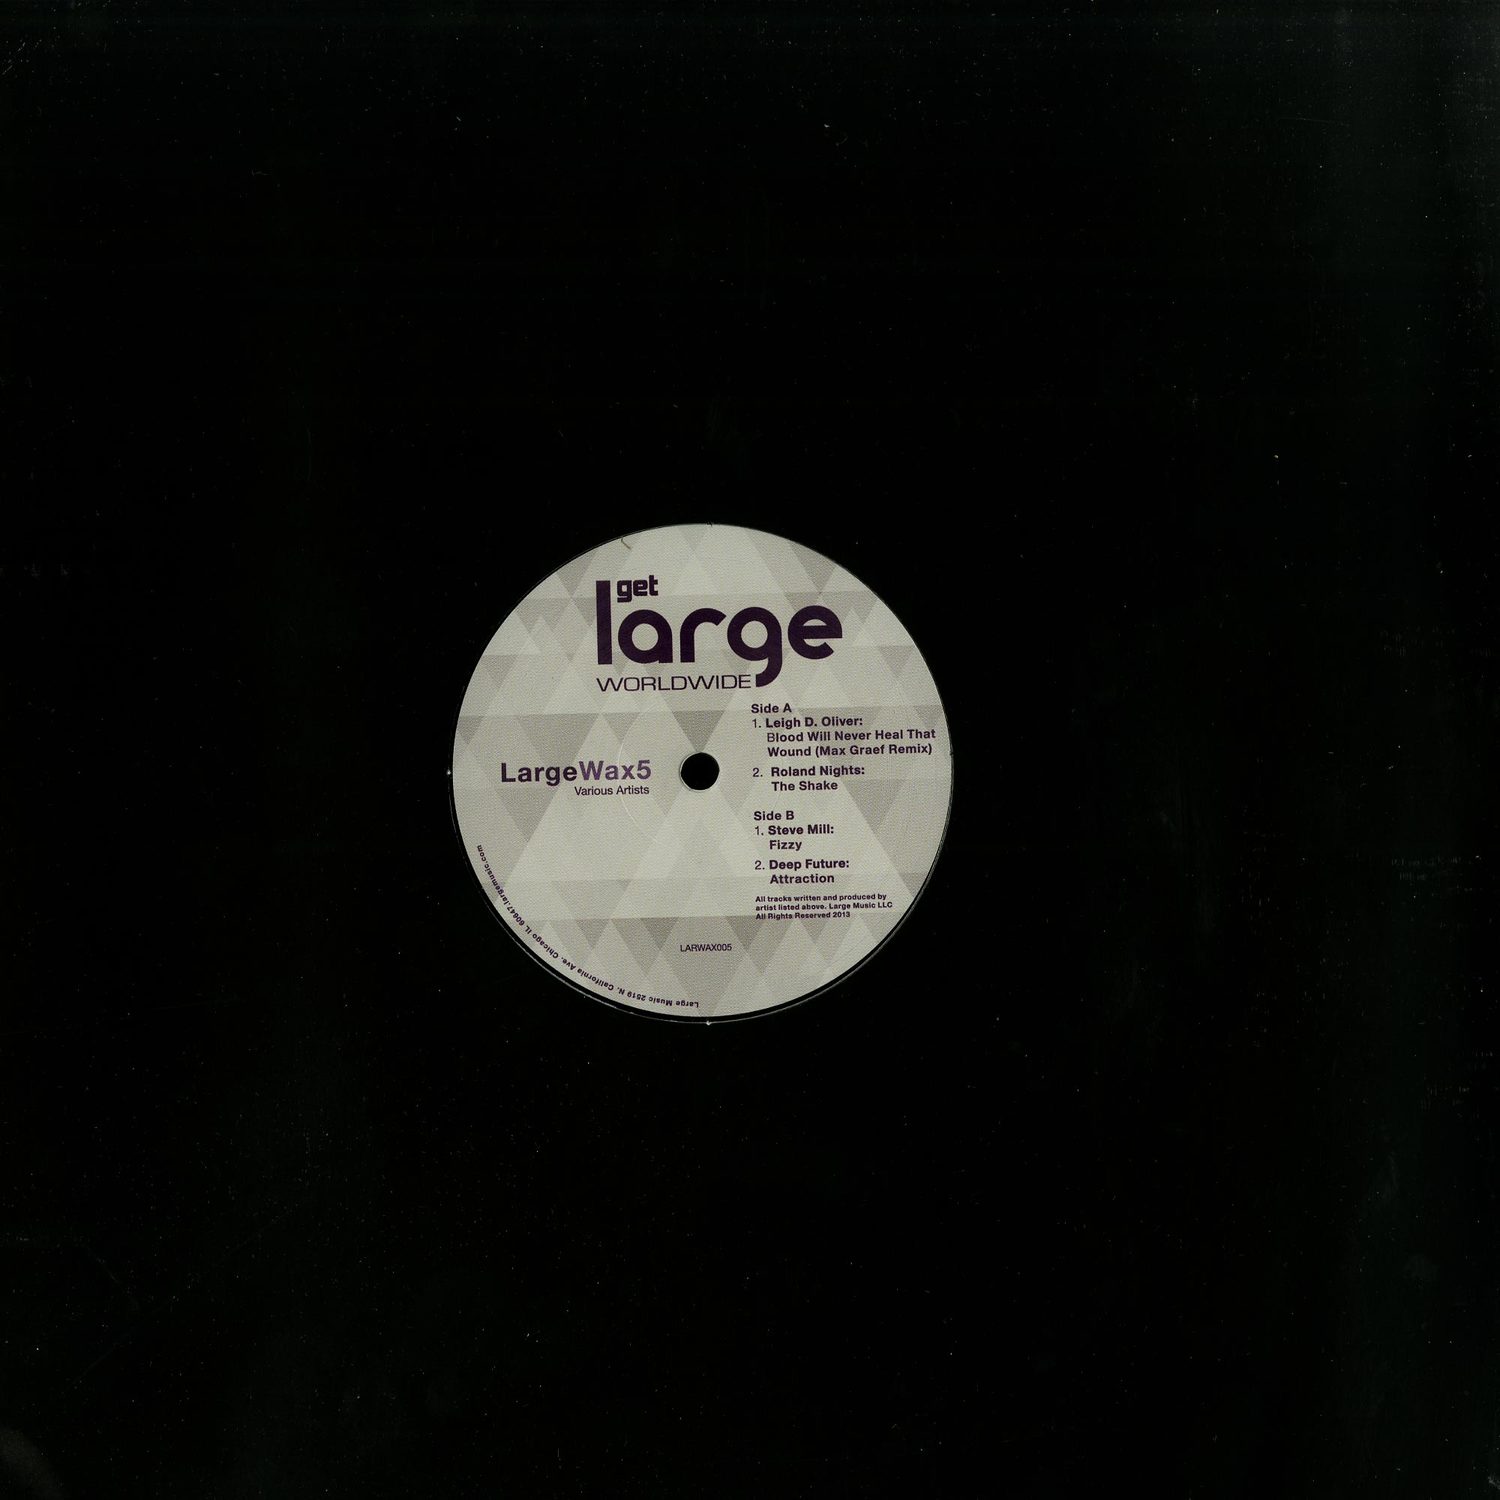 Leigh D Oliver, Roland Nights, Steve Mill, Deep Future, Max Graef - LARGE WAX 5